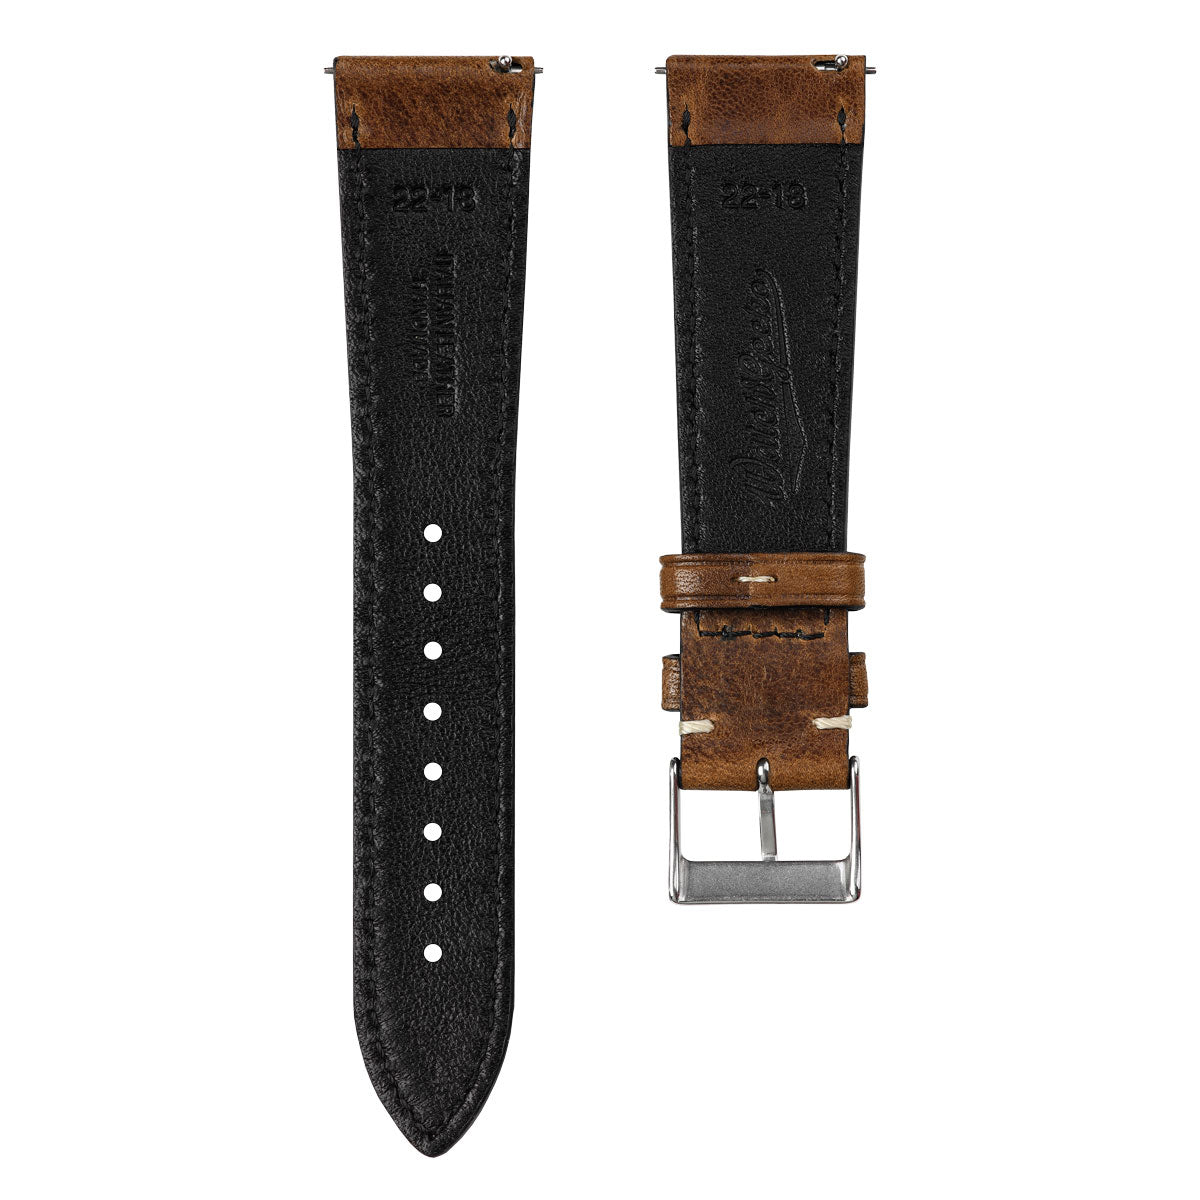 Flat Highley Genuine Leather Watch Strap - Light Brown